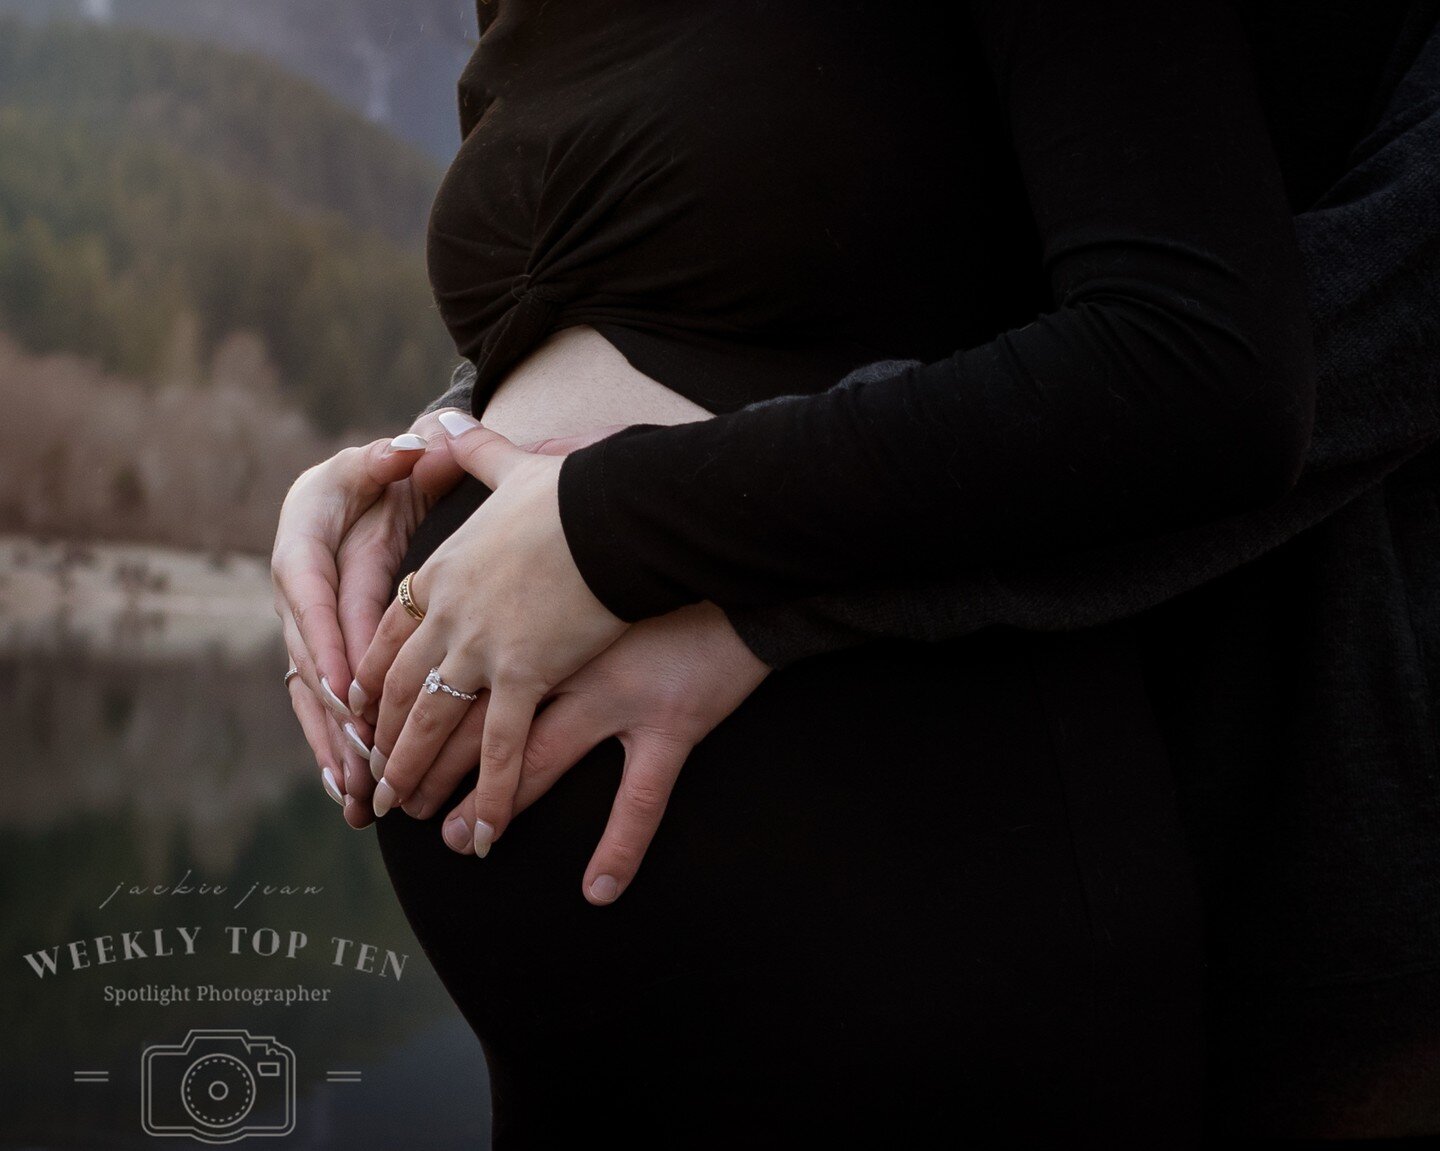 This image made the top ten for this week's theme: HANDS. This session at Rattlesnake Lake was absolutely one of my favorites. This beautiful couple was a dream to photograph. 

#puyallupfamilyphotographer 
#tacomafamilyphotographer 
#maternityphotog